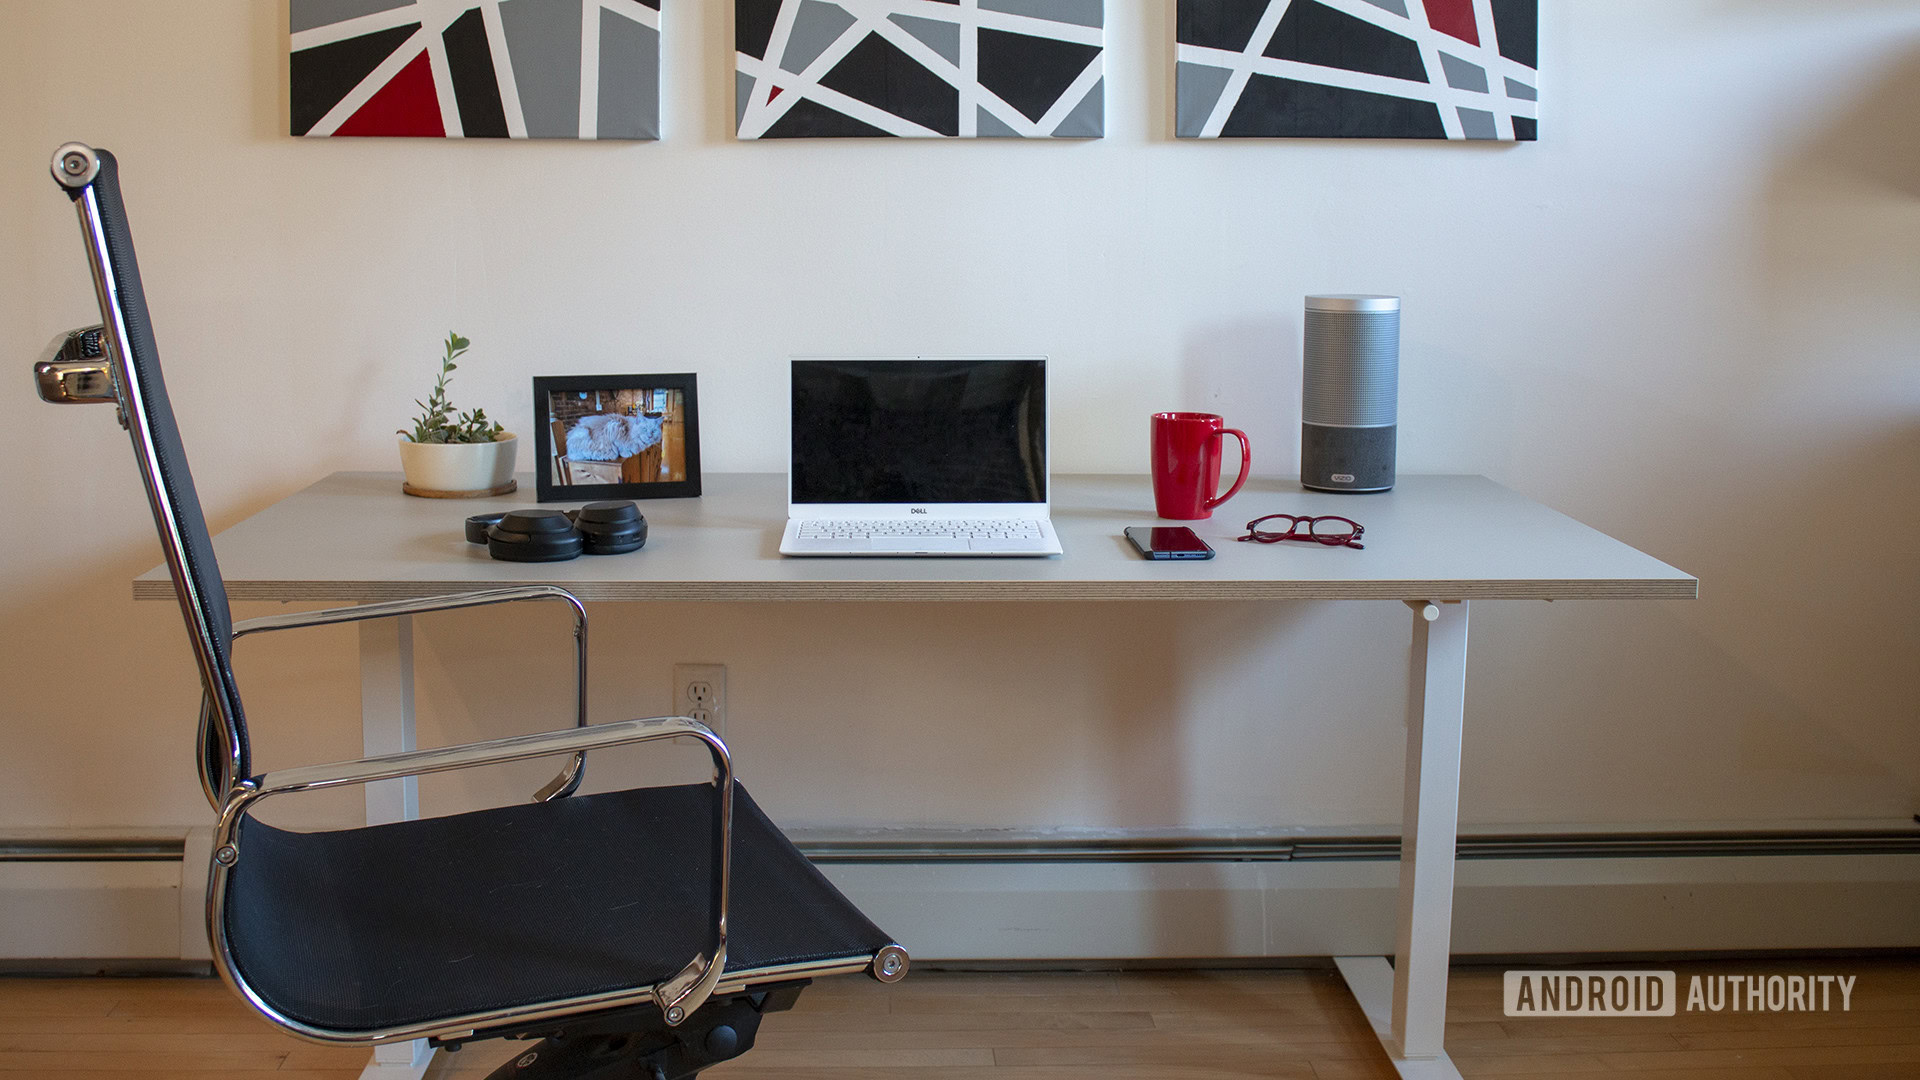 Ikea Skarsta review: The most basic of standing desks - Android